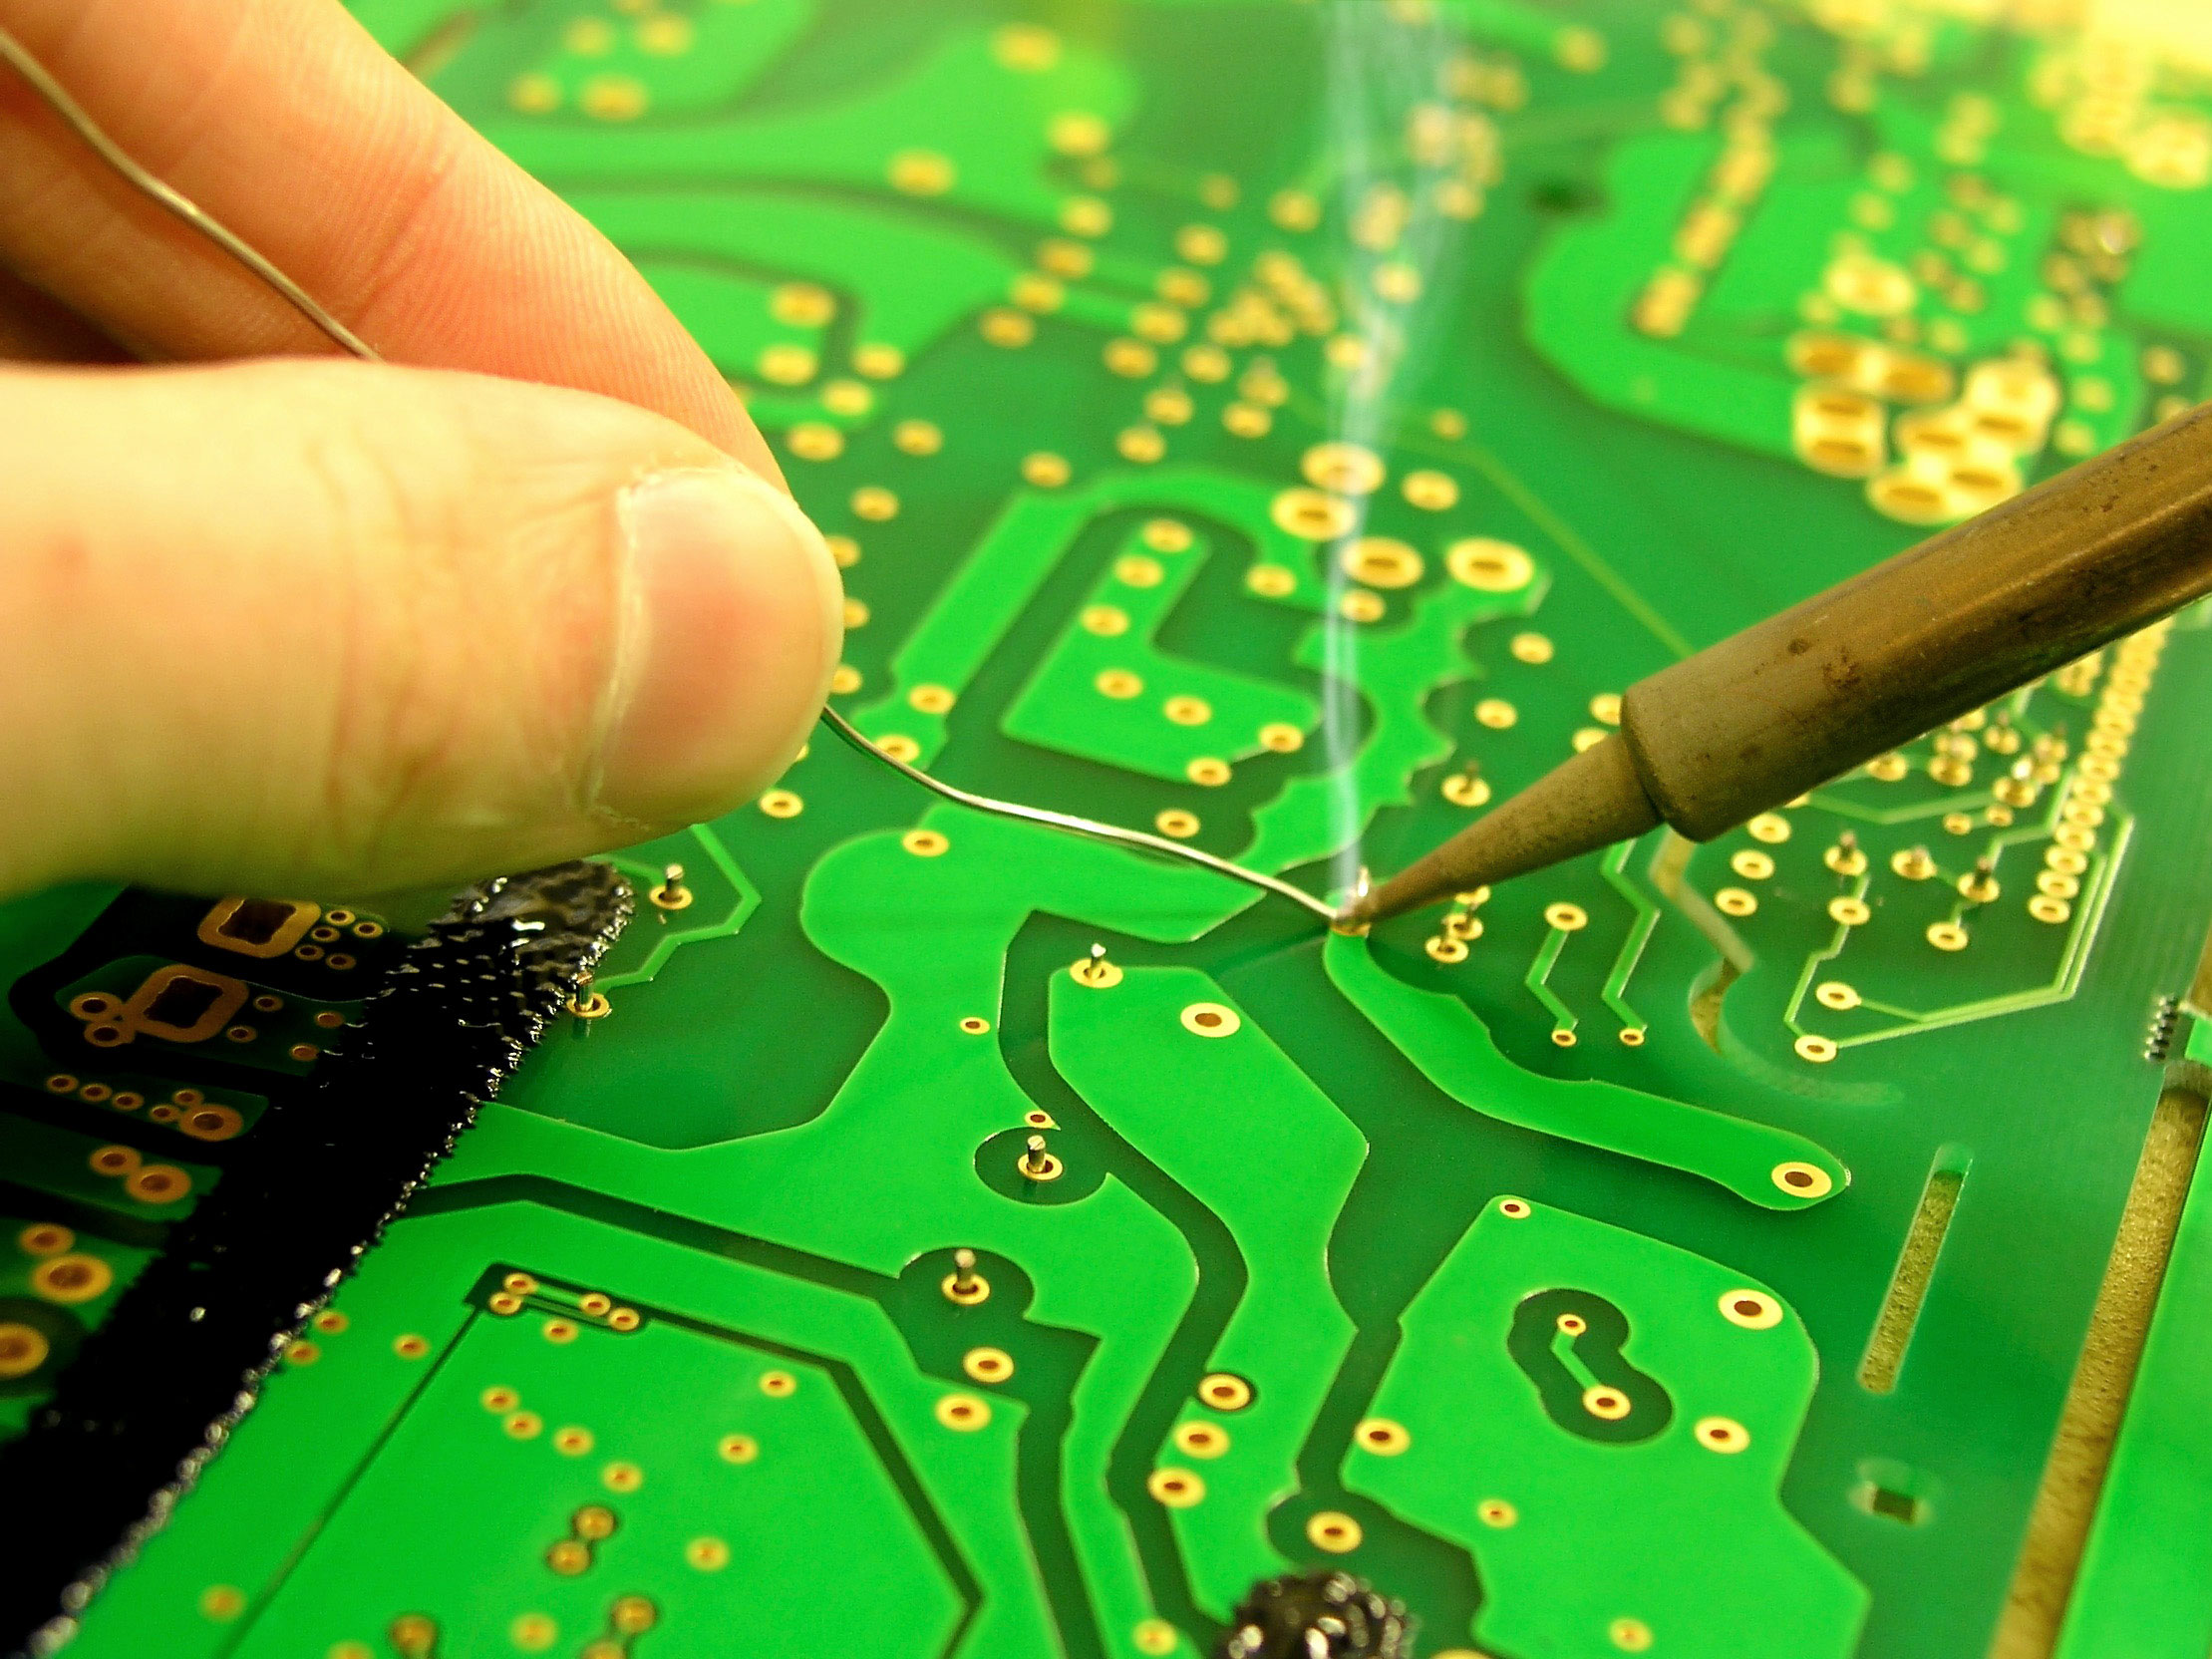 pair of hands soldering a green electronic circuit board